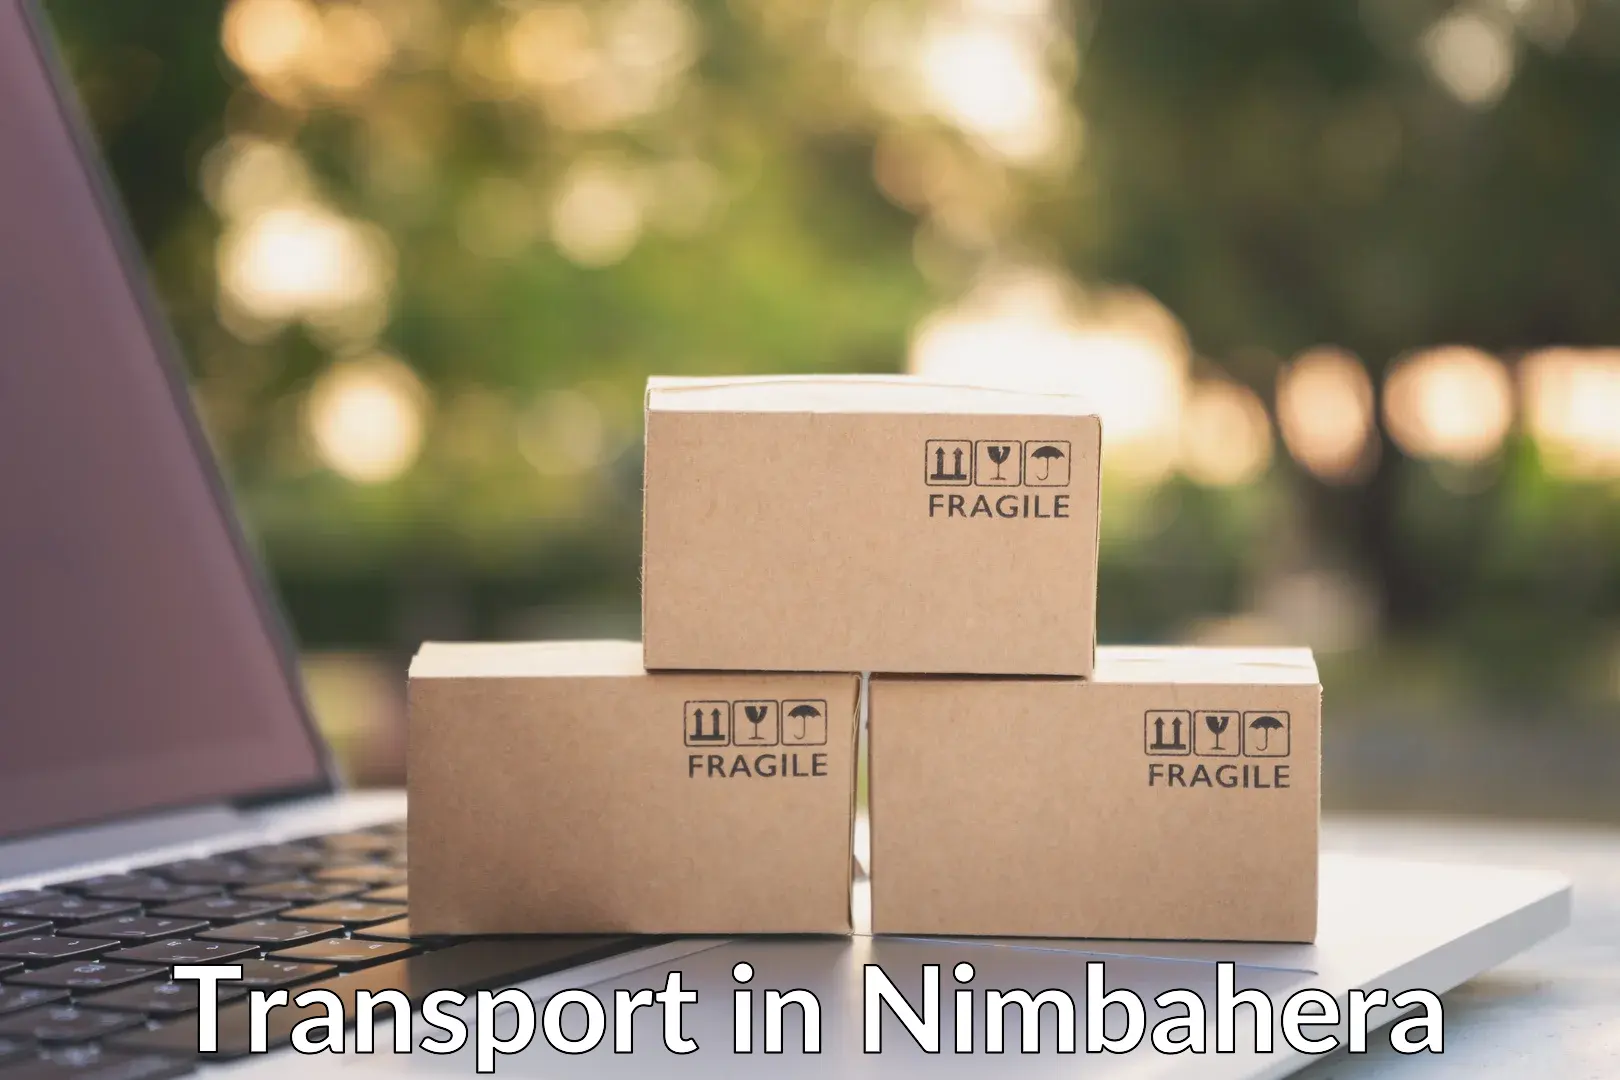 Road transport online services in Nimbahera